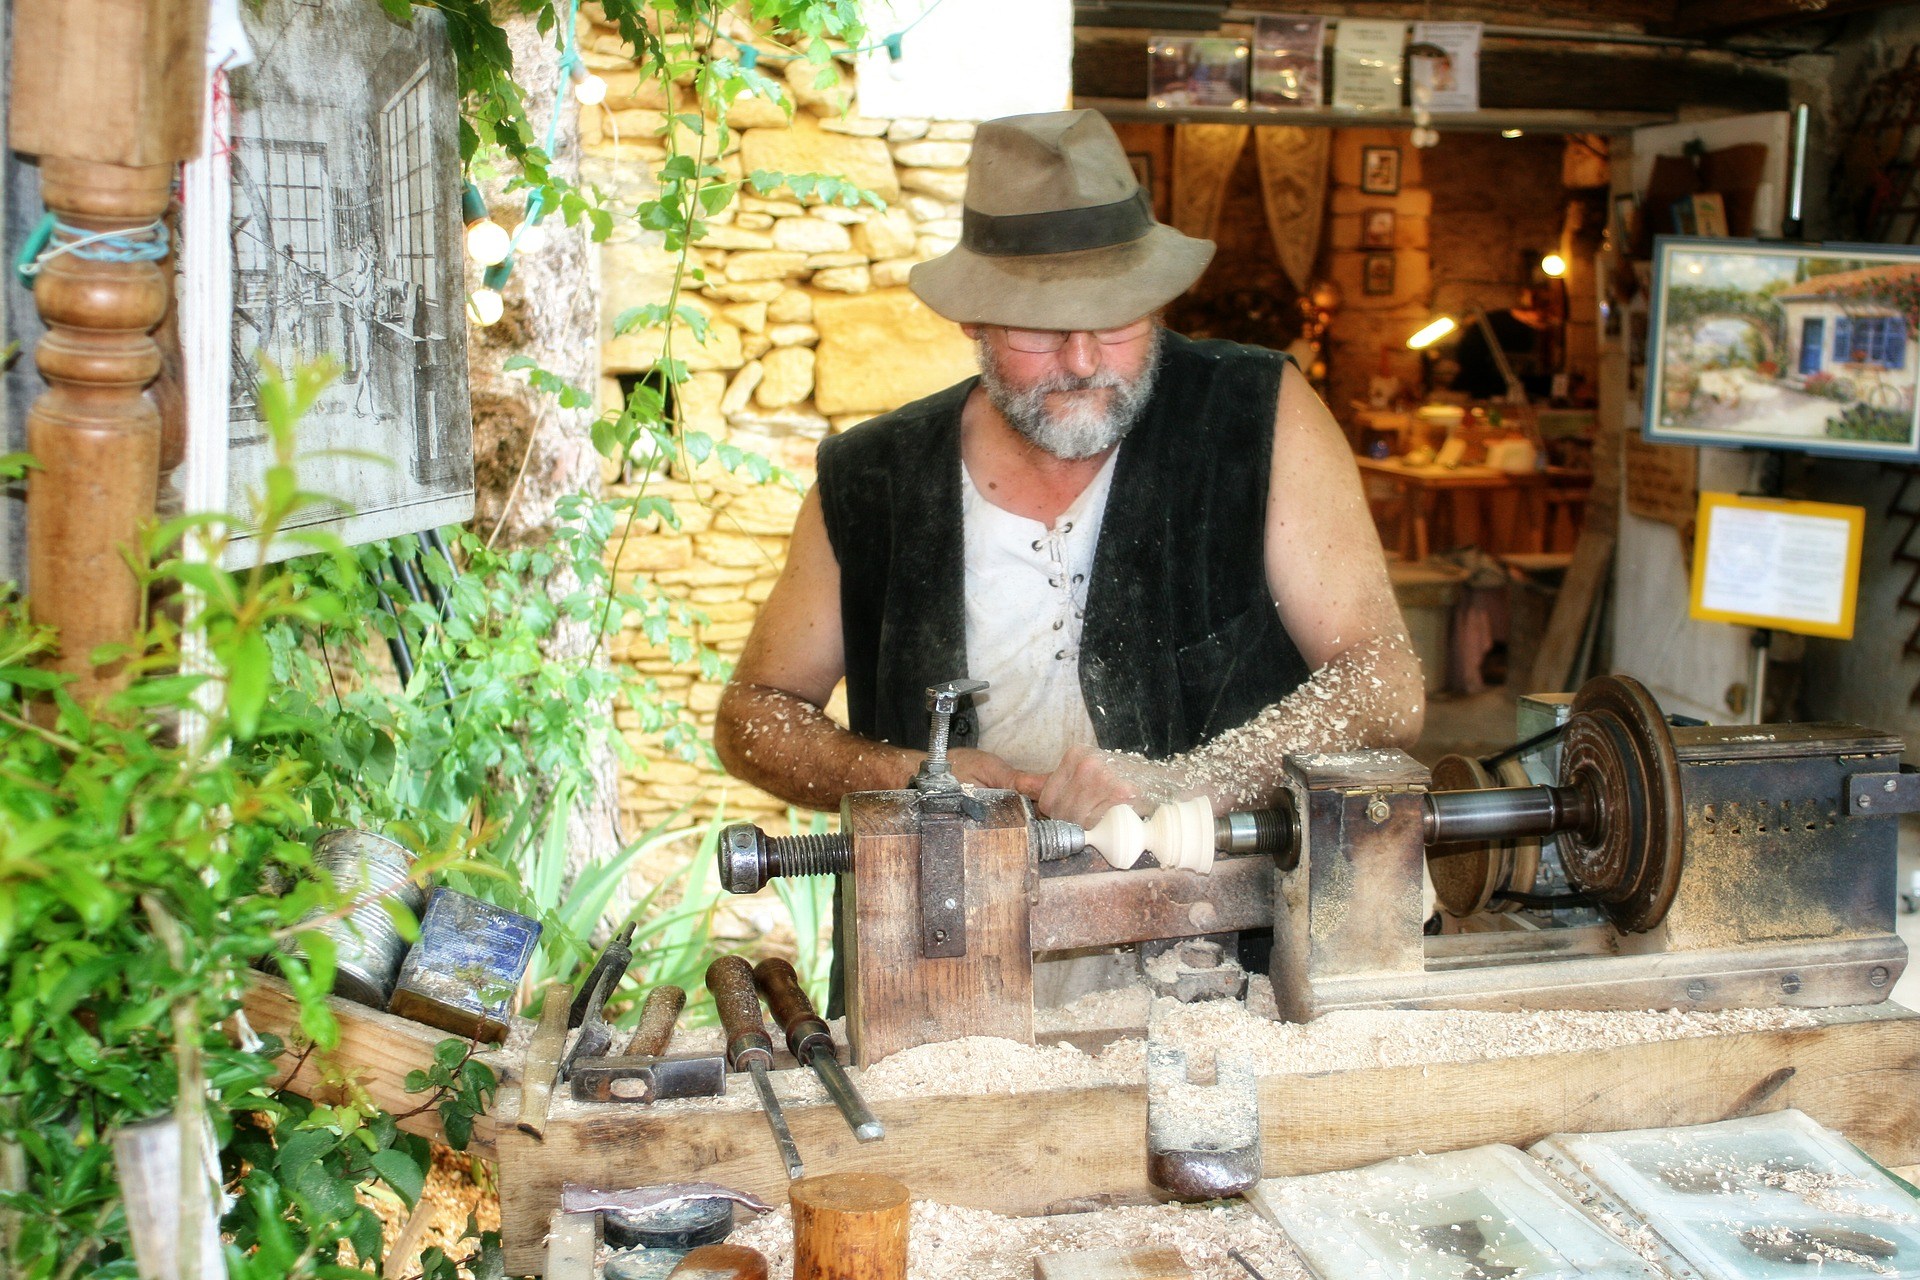 Teds Woodworking 1